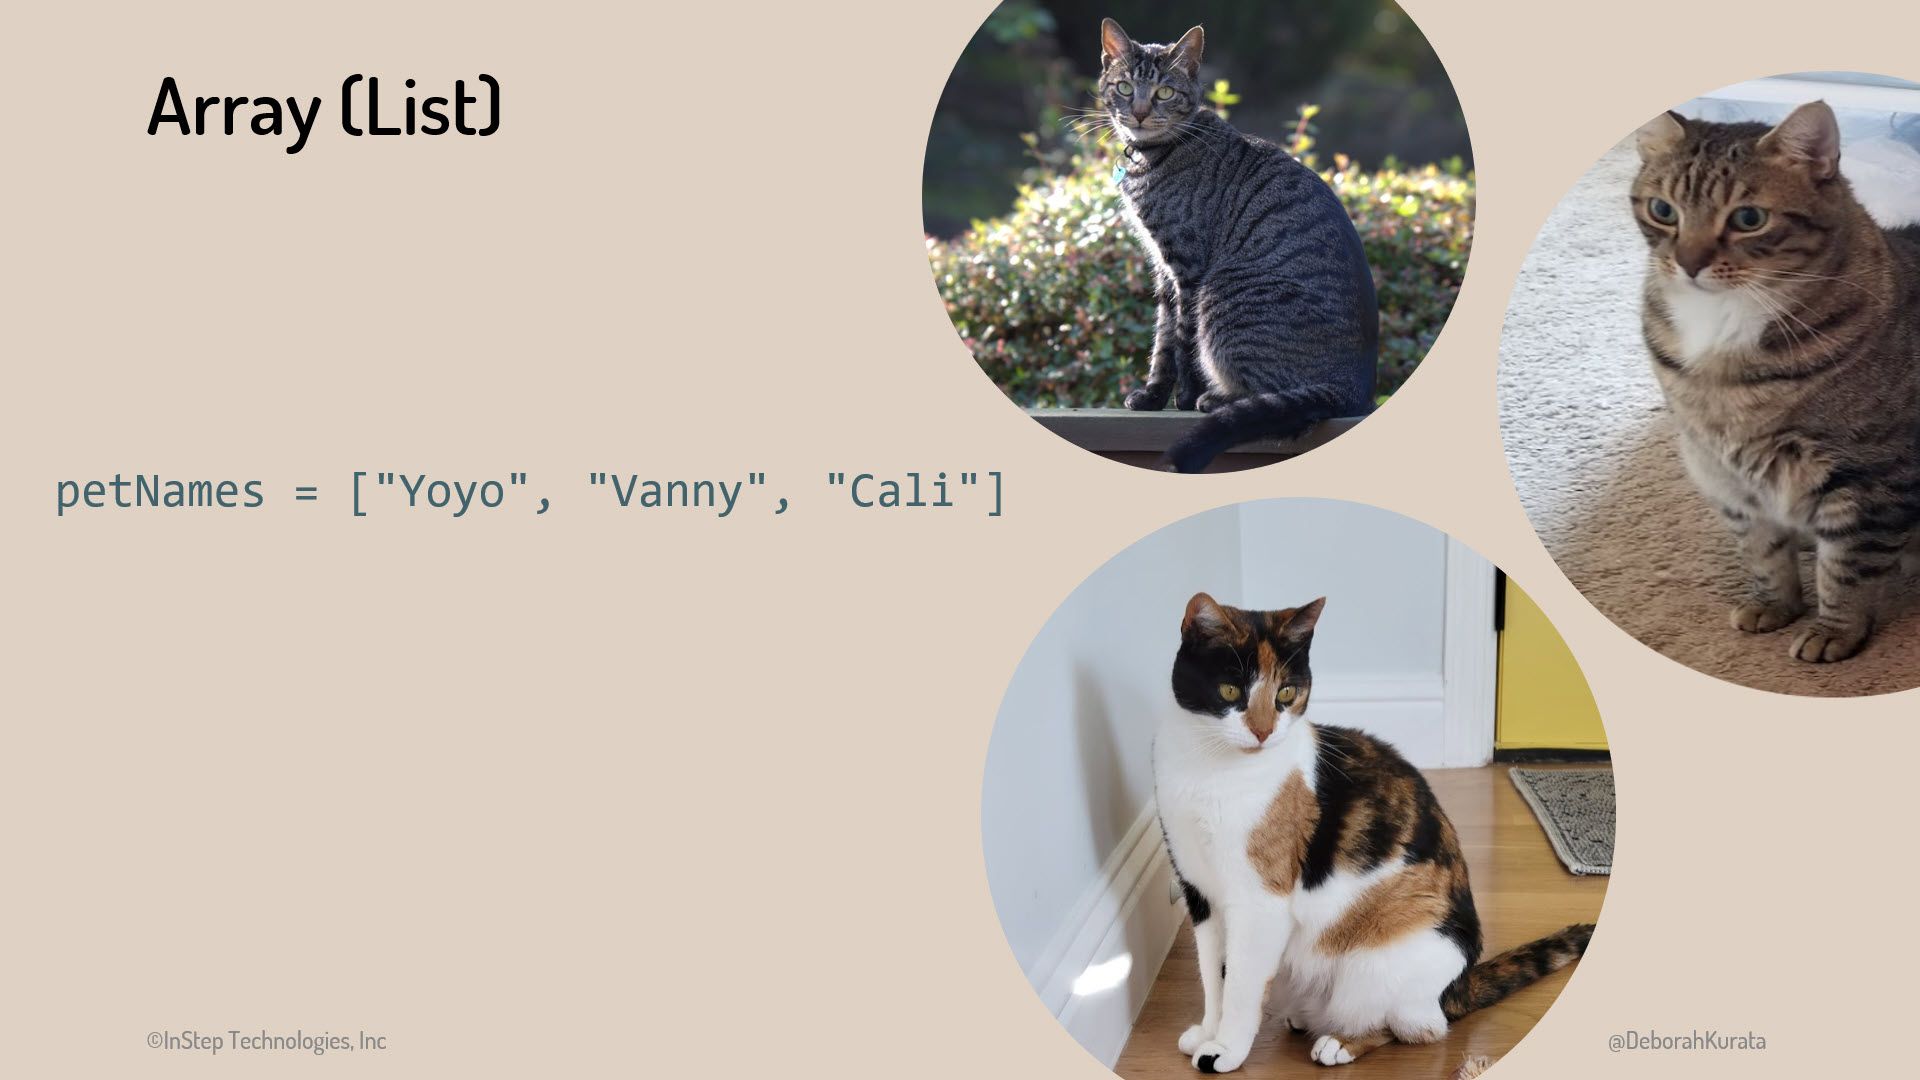 Pictures of three cats with a single array to hold the name of each cat.